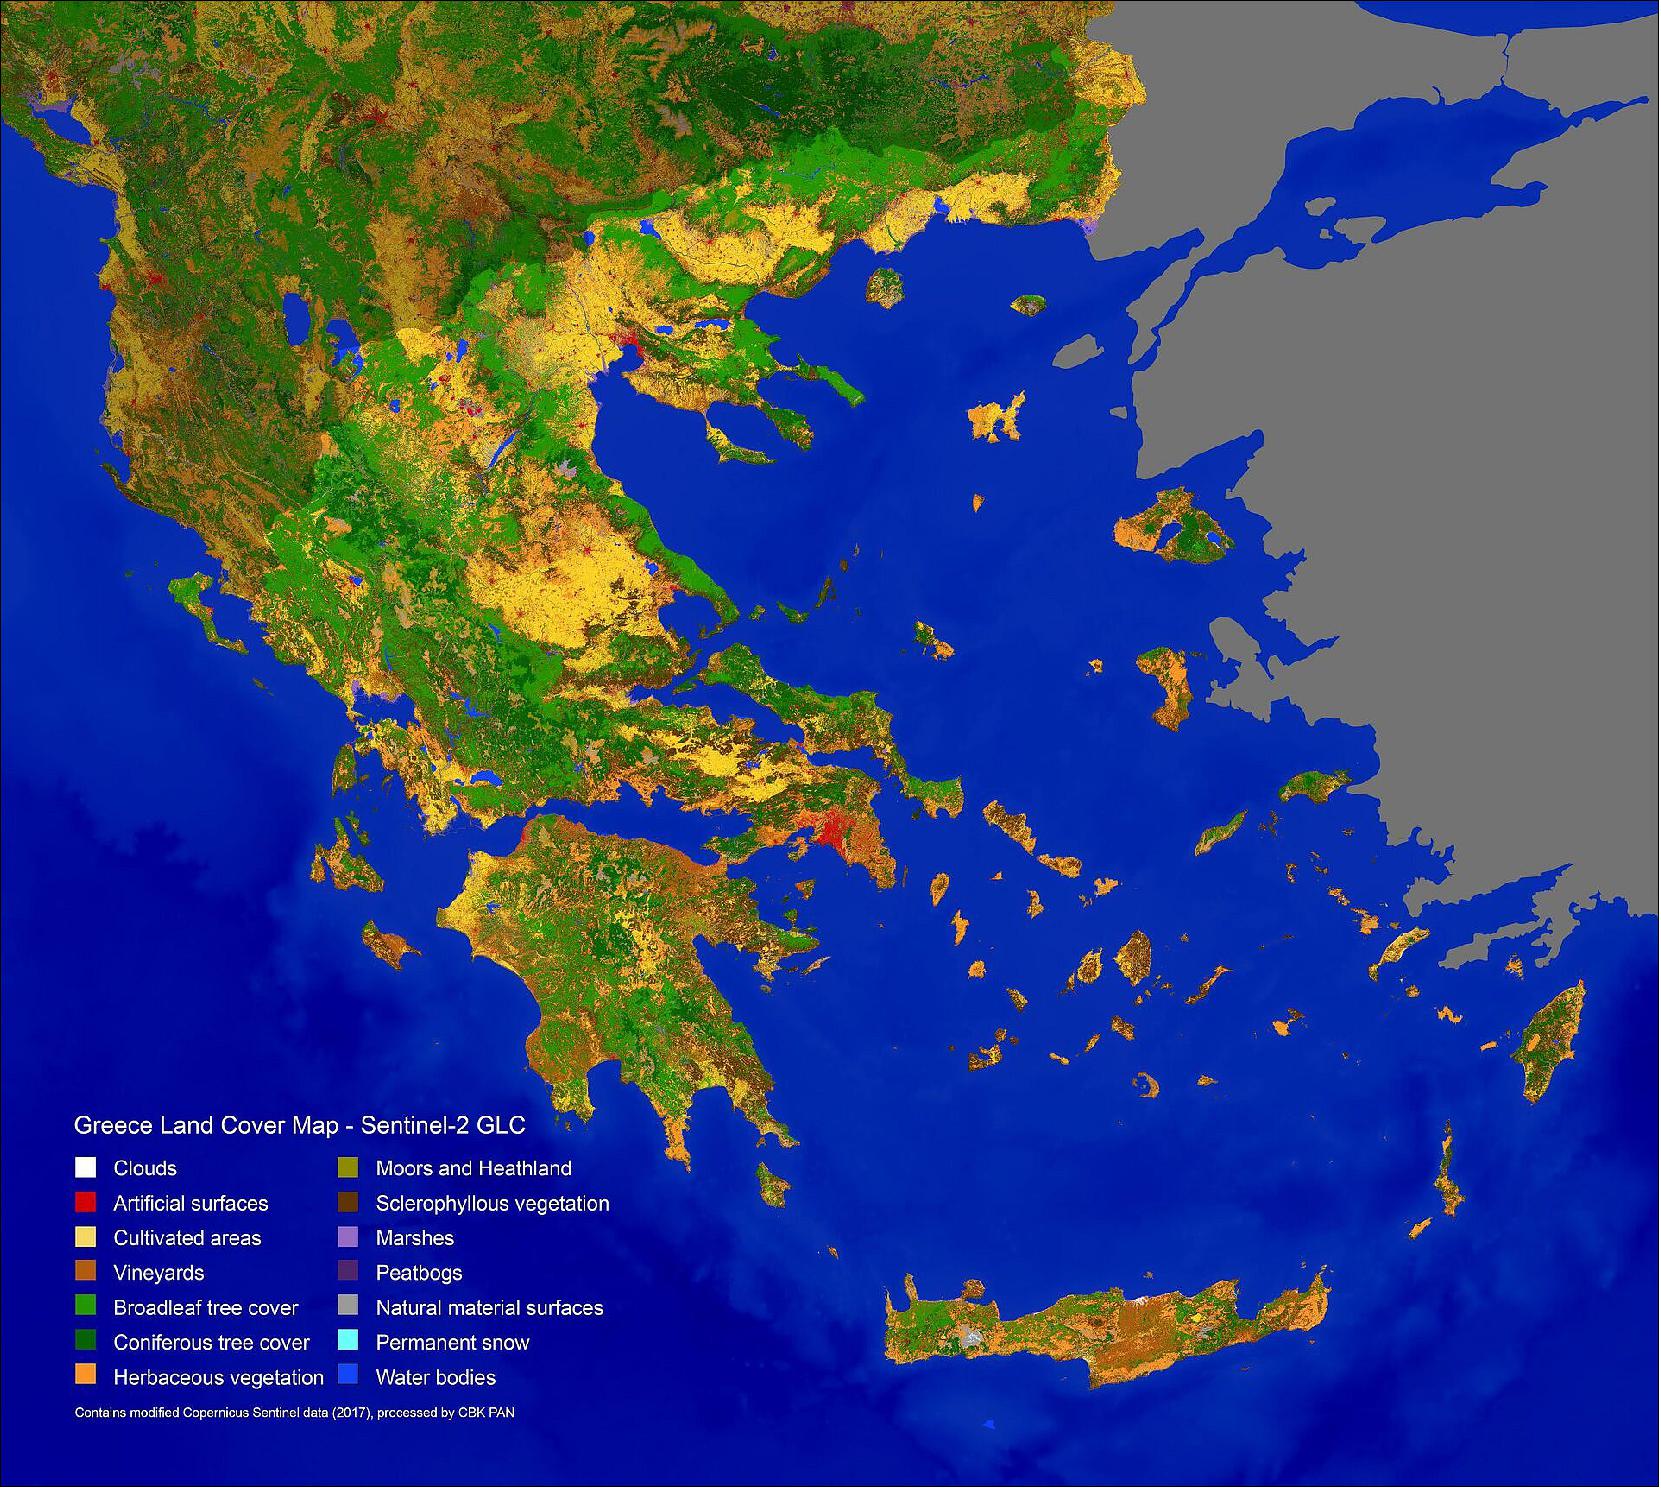 Figure 54: Greece land cover map (image credit: ESA, the image contains modified Copernicus Sentinel data (2017), processed by CBK PANsí mi)